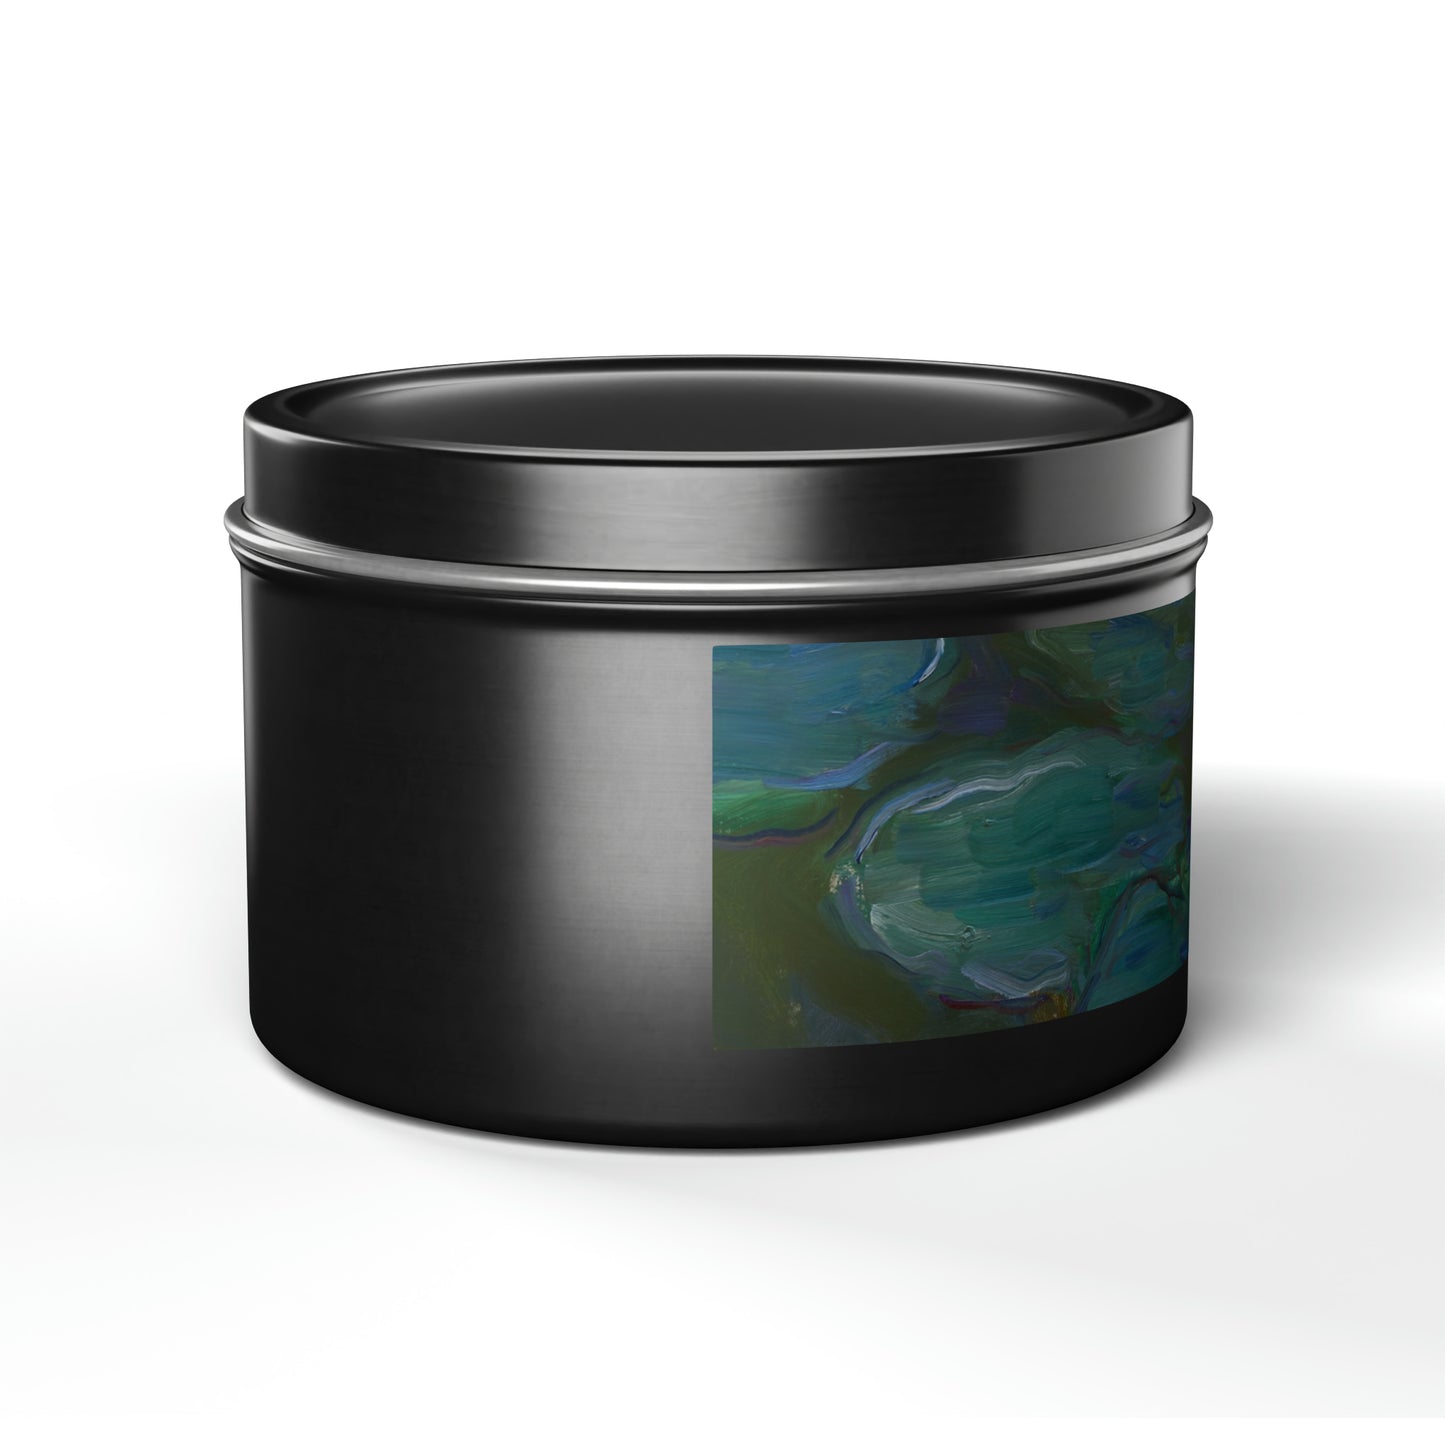 a black container with a painting on it